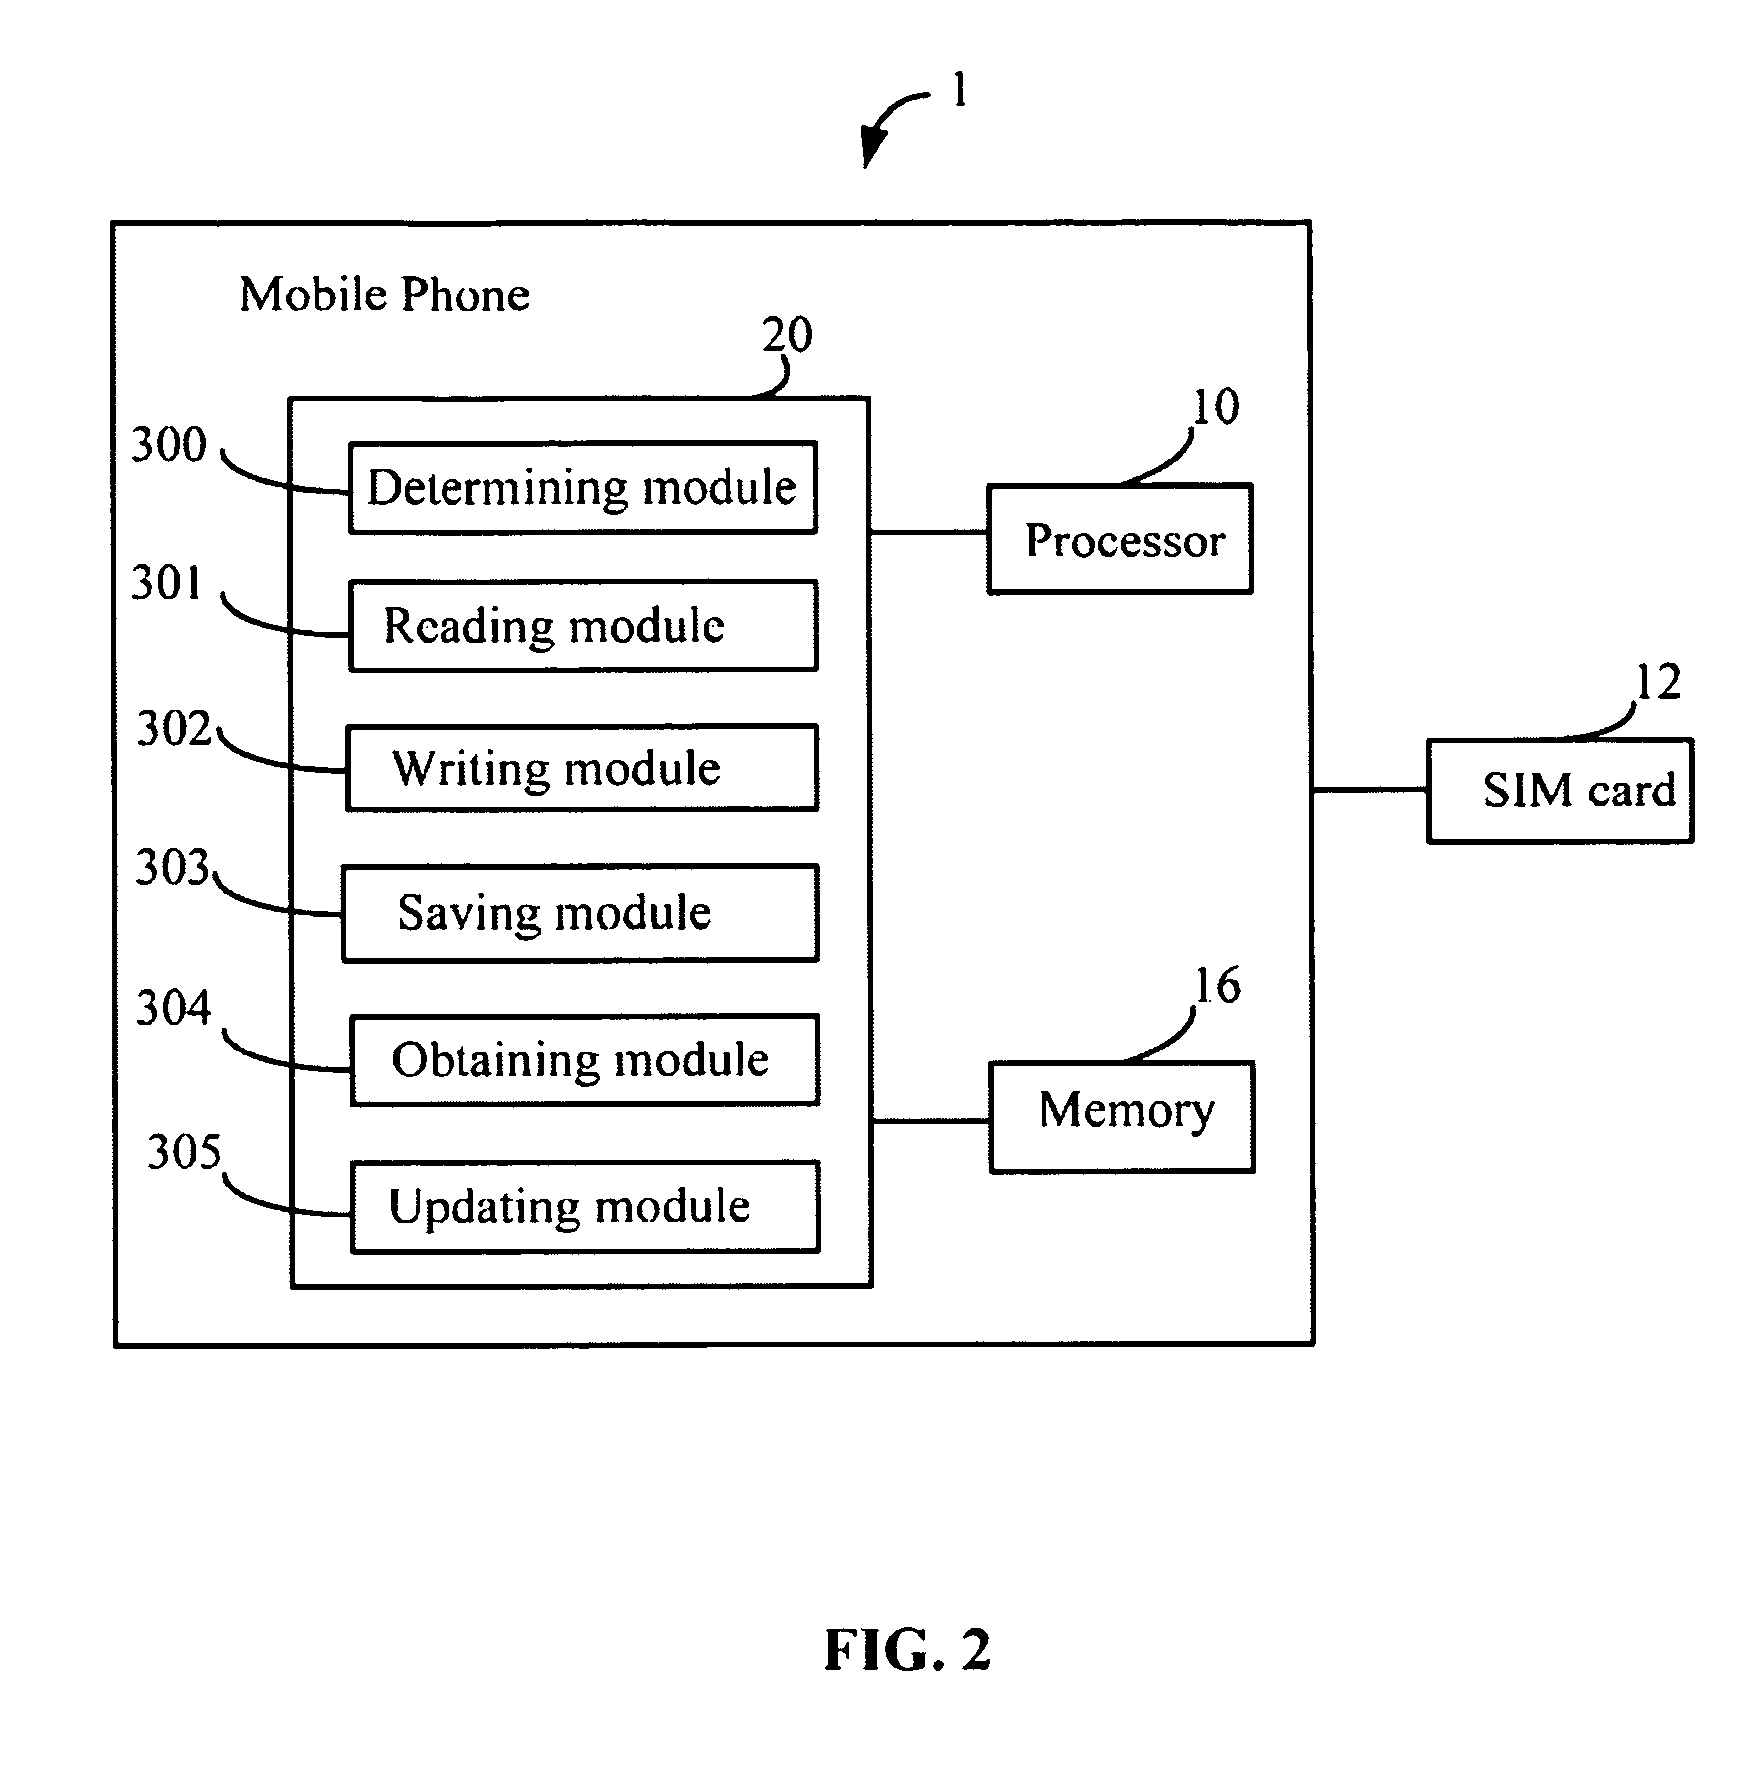 System and method for performing quick short message functions for a mobile phone